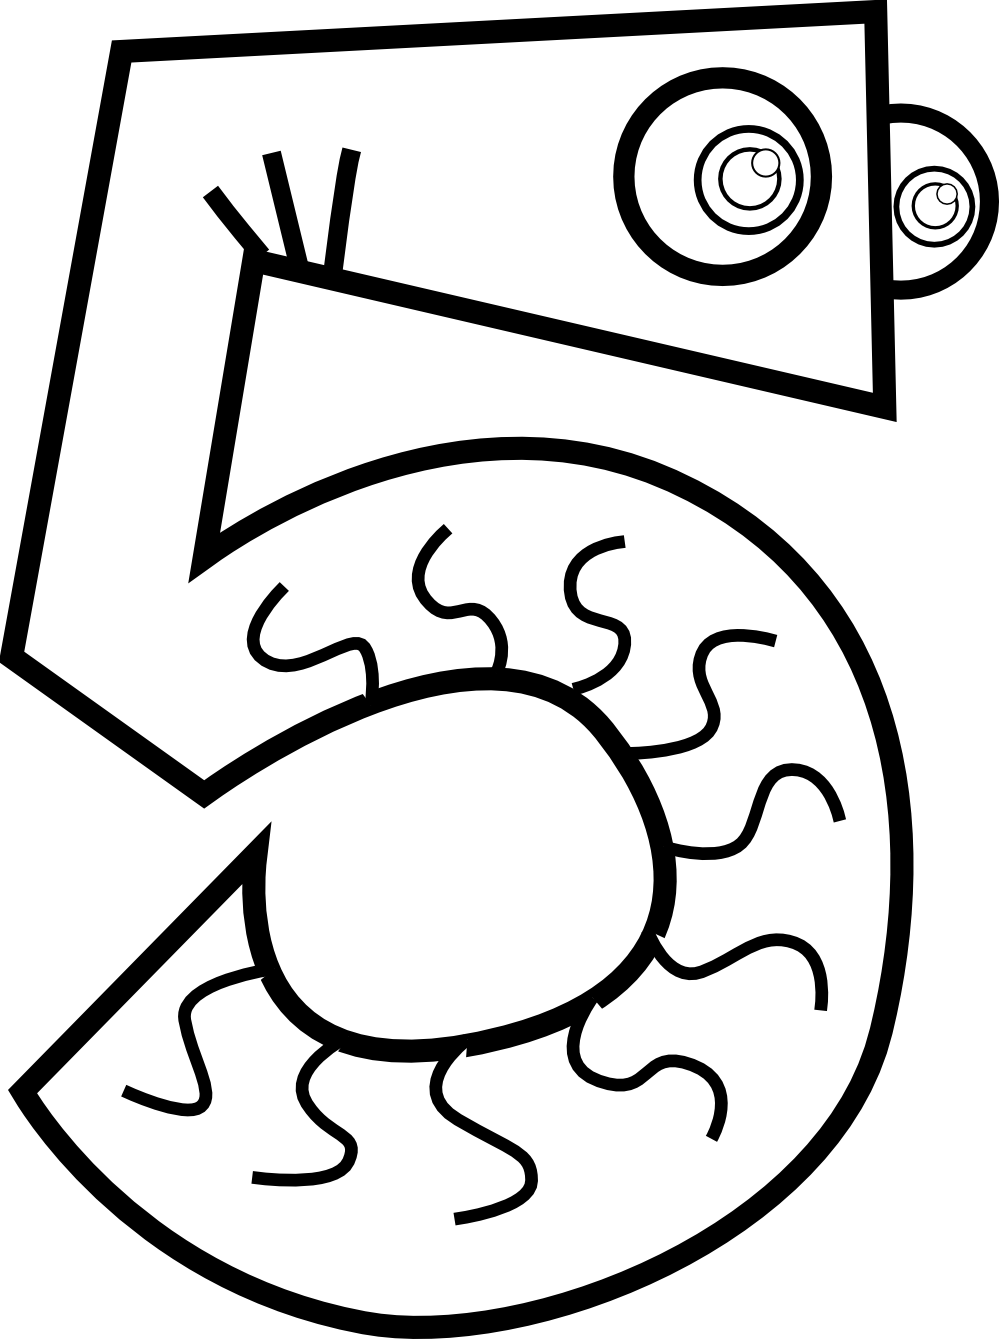 Number 4 Clip Art - Cliparts.co